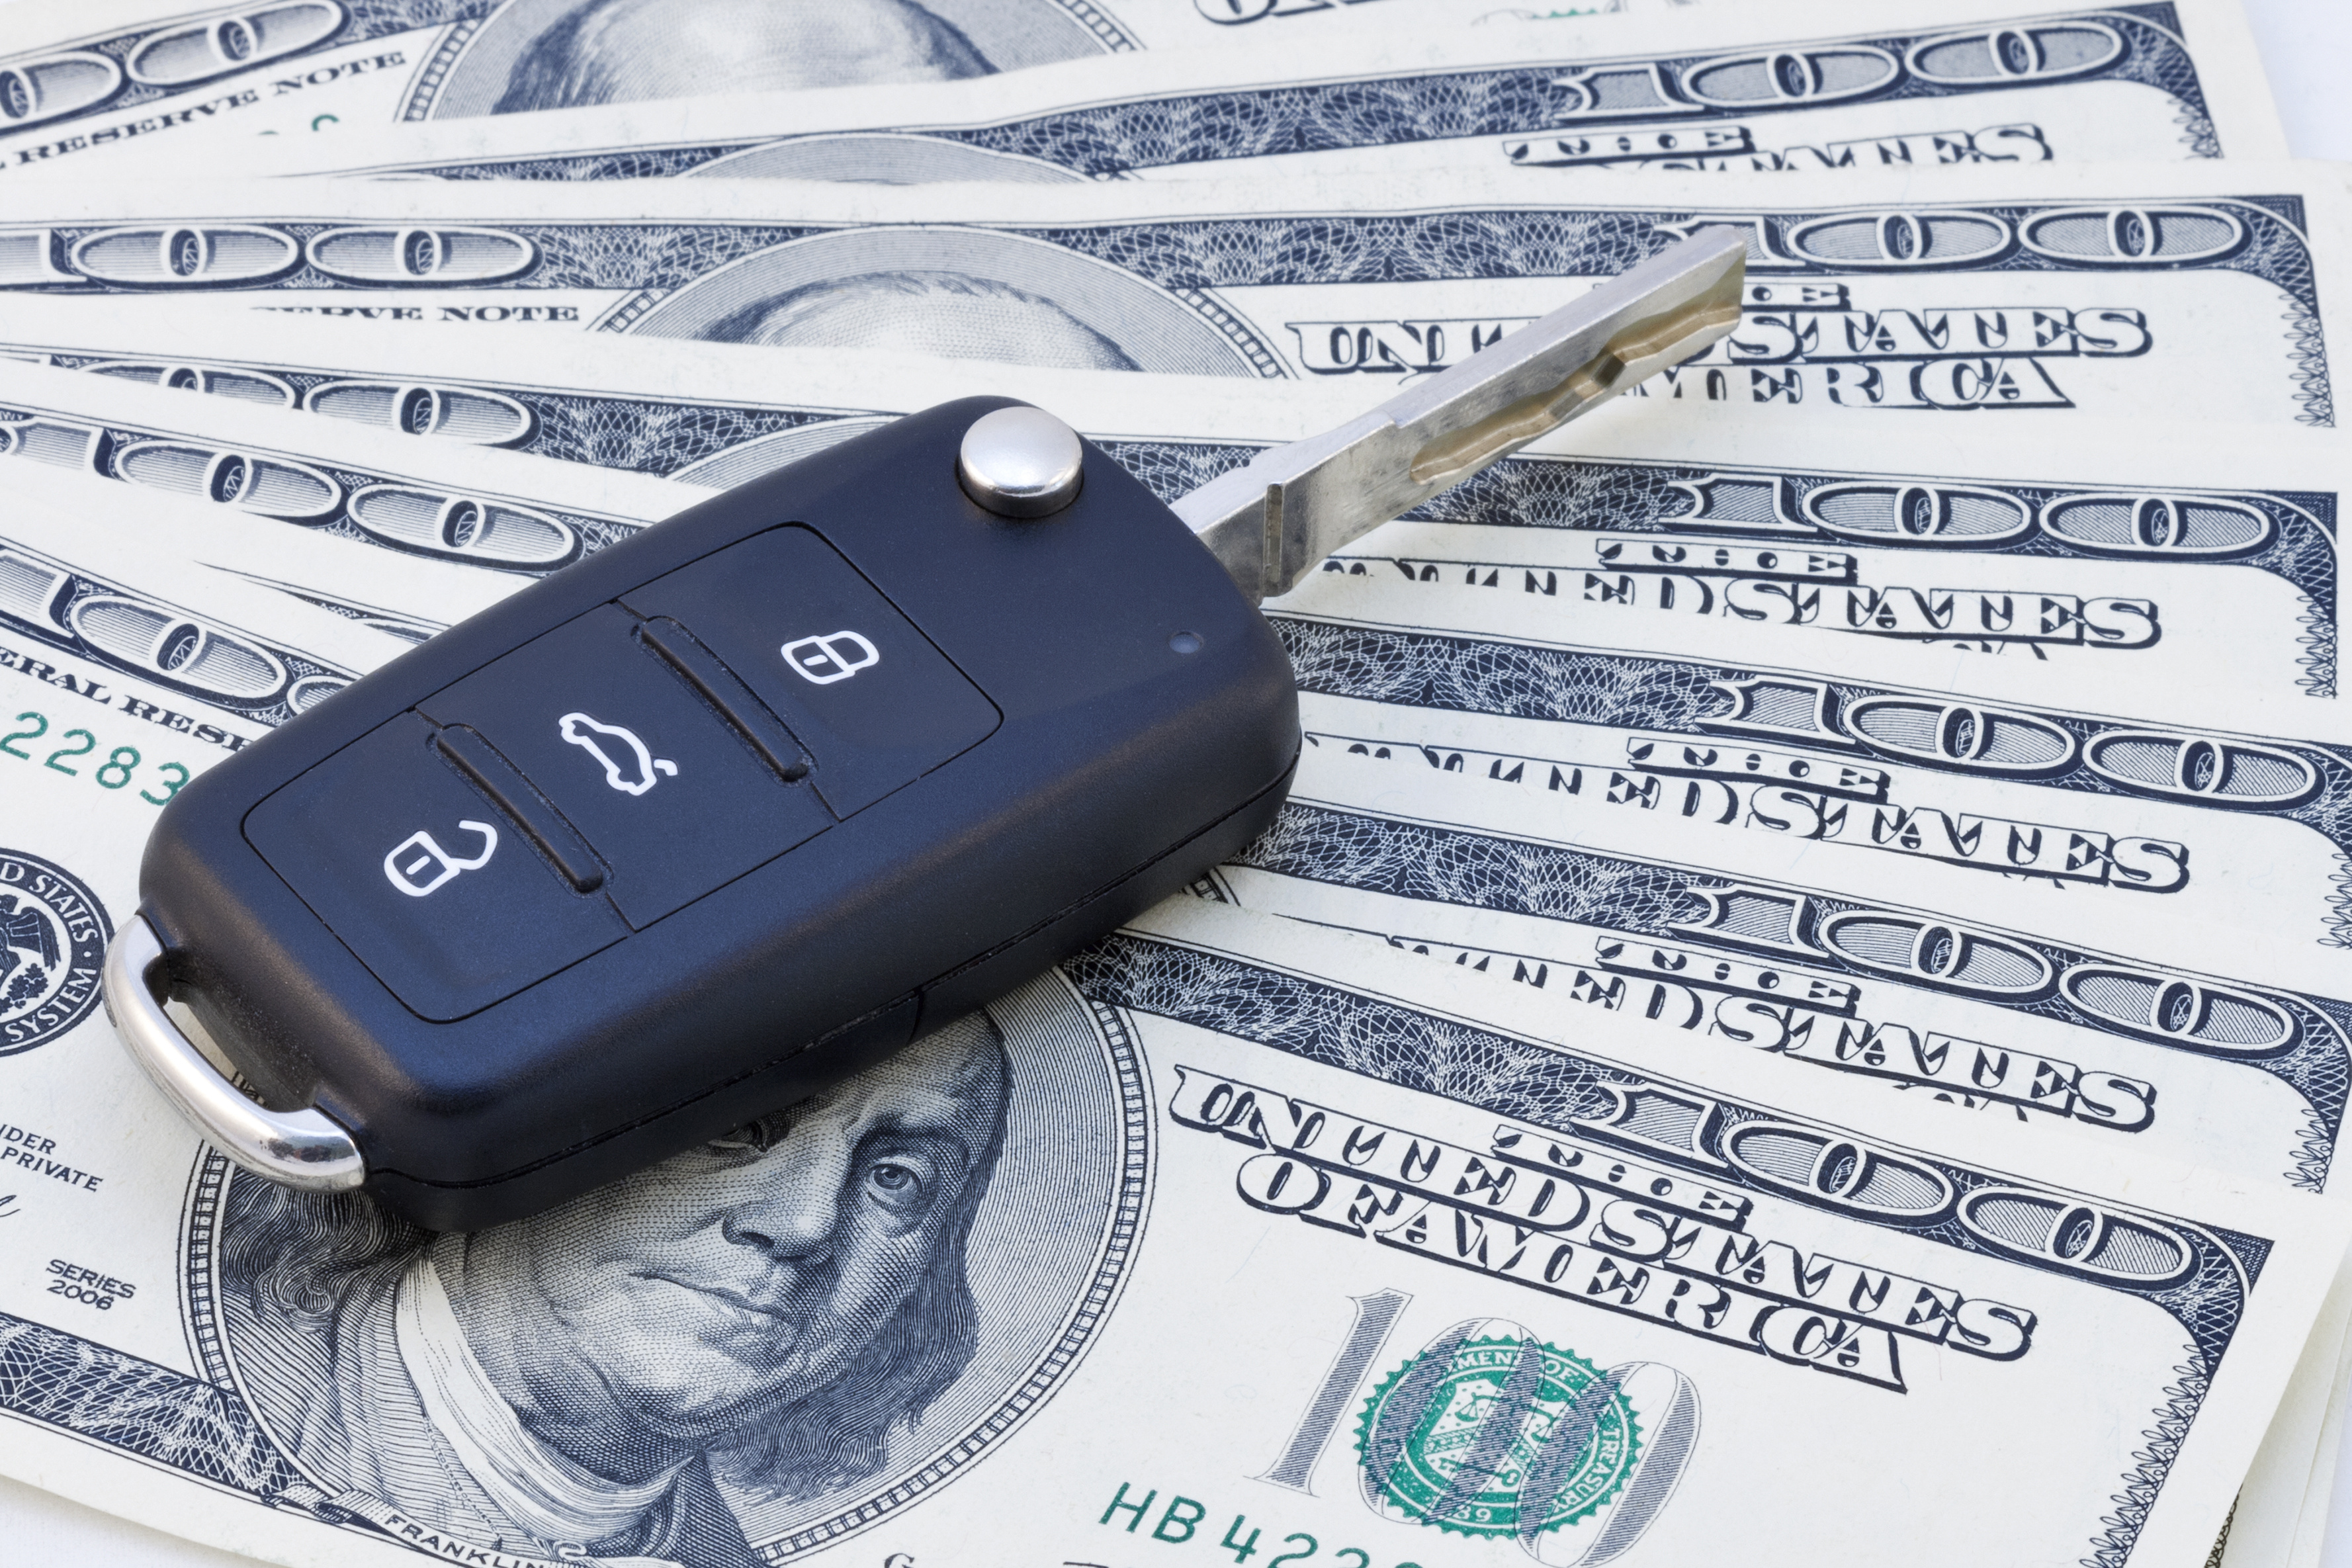 The professionals at Auto Loan Store are committed to providing title loans in South Florida to responsible consumers who need cash quickly.